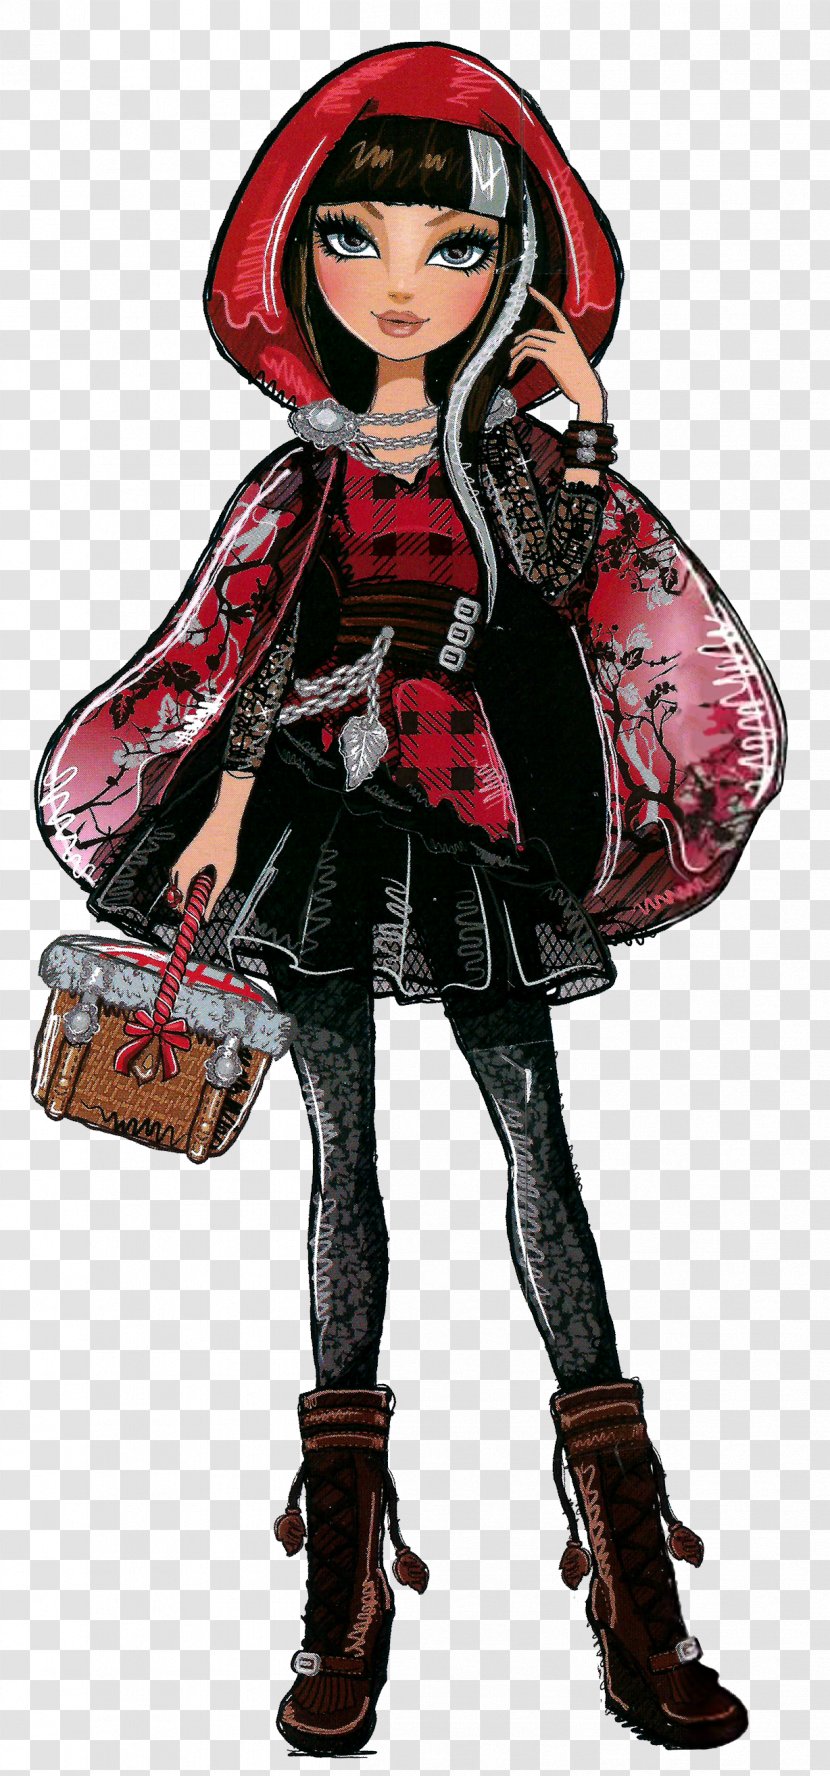 Cerise Hood Big Bad Wolf Little Red Riding Doll Character - Fashion Illustration Transparent PNG